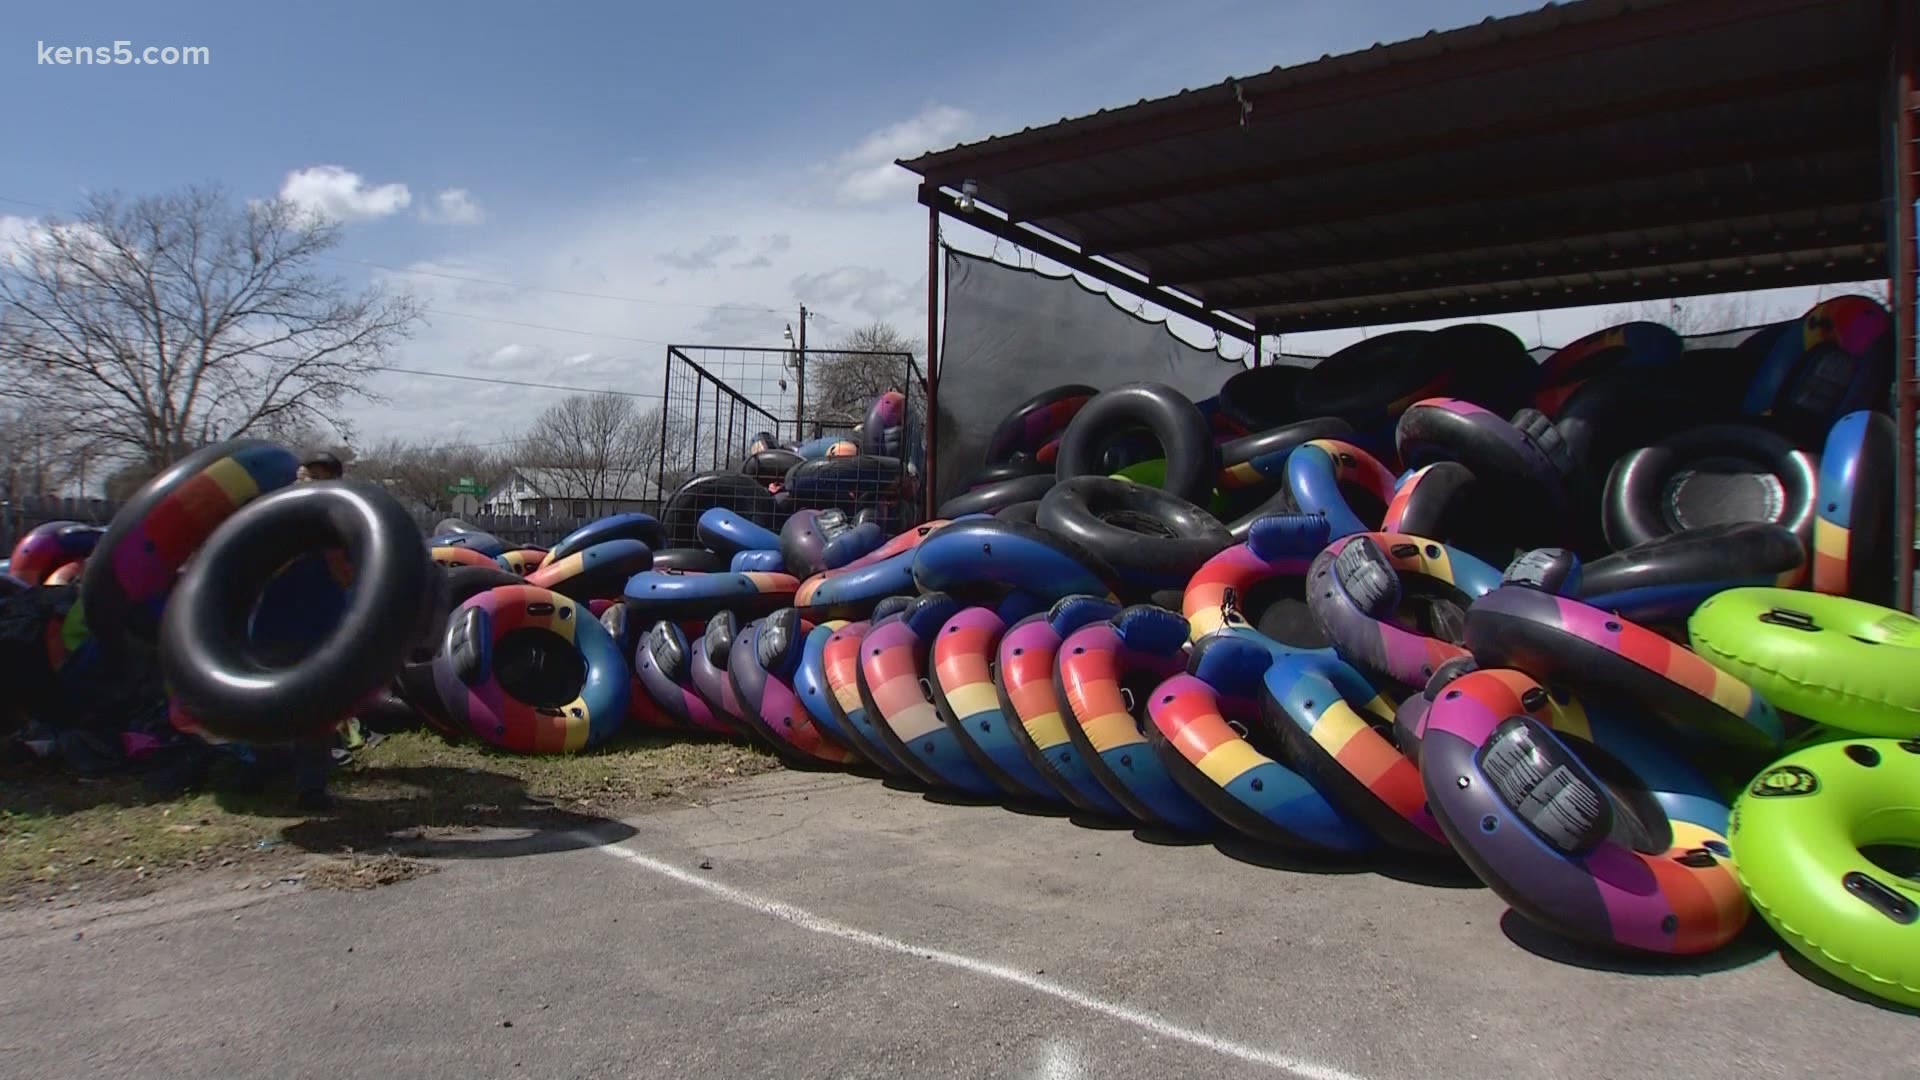 In 2020, tubing businesses had to close up when the season had barely started. Now they're welcoming back customers.